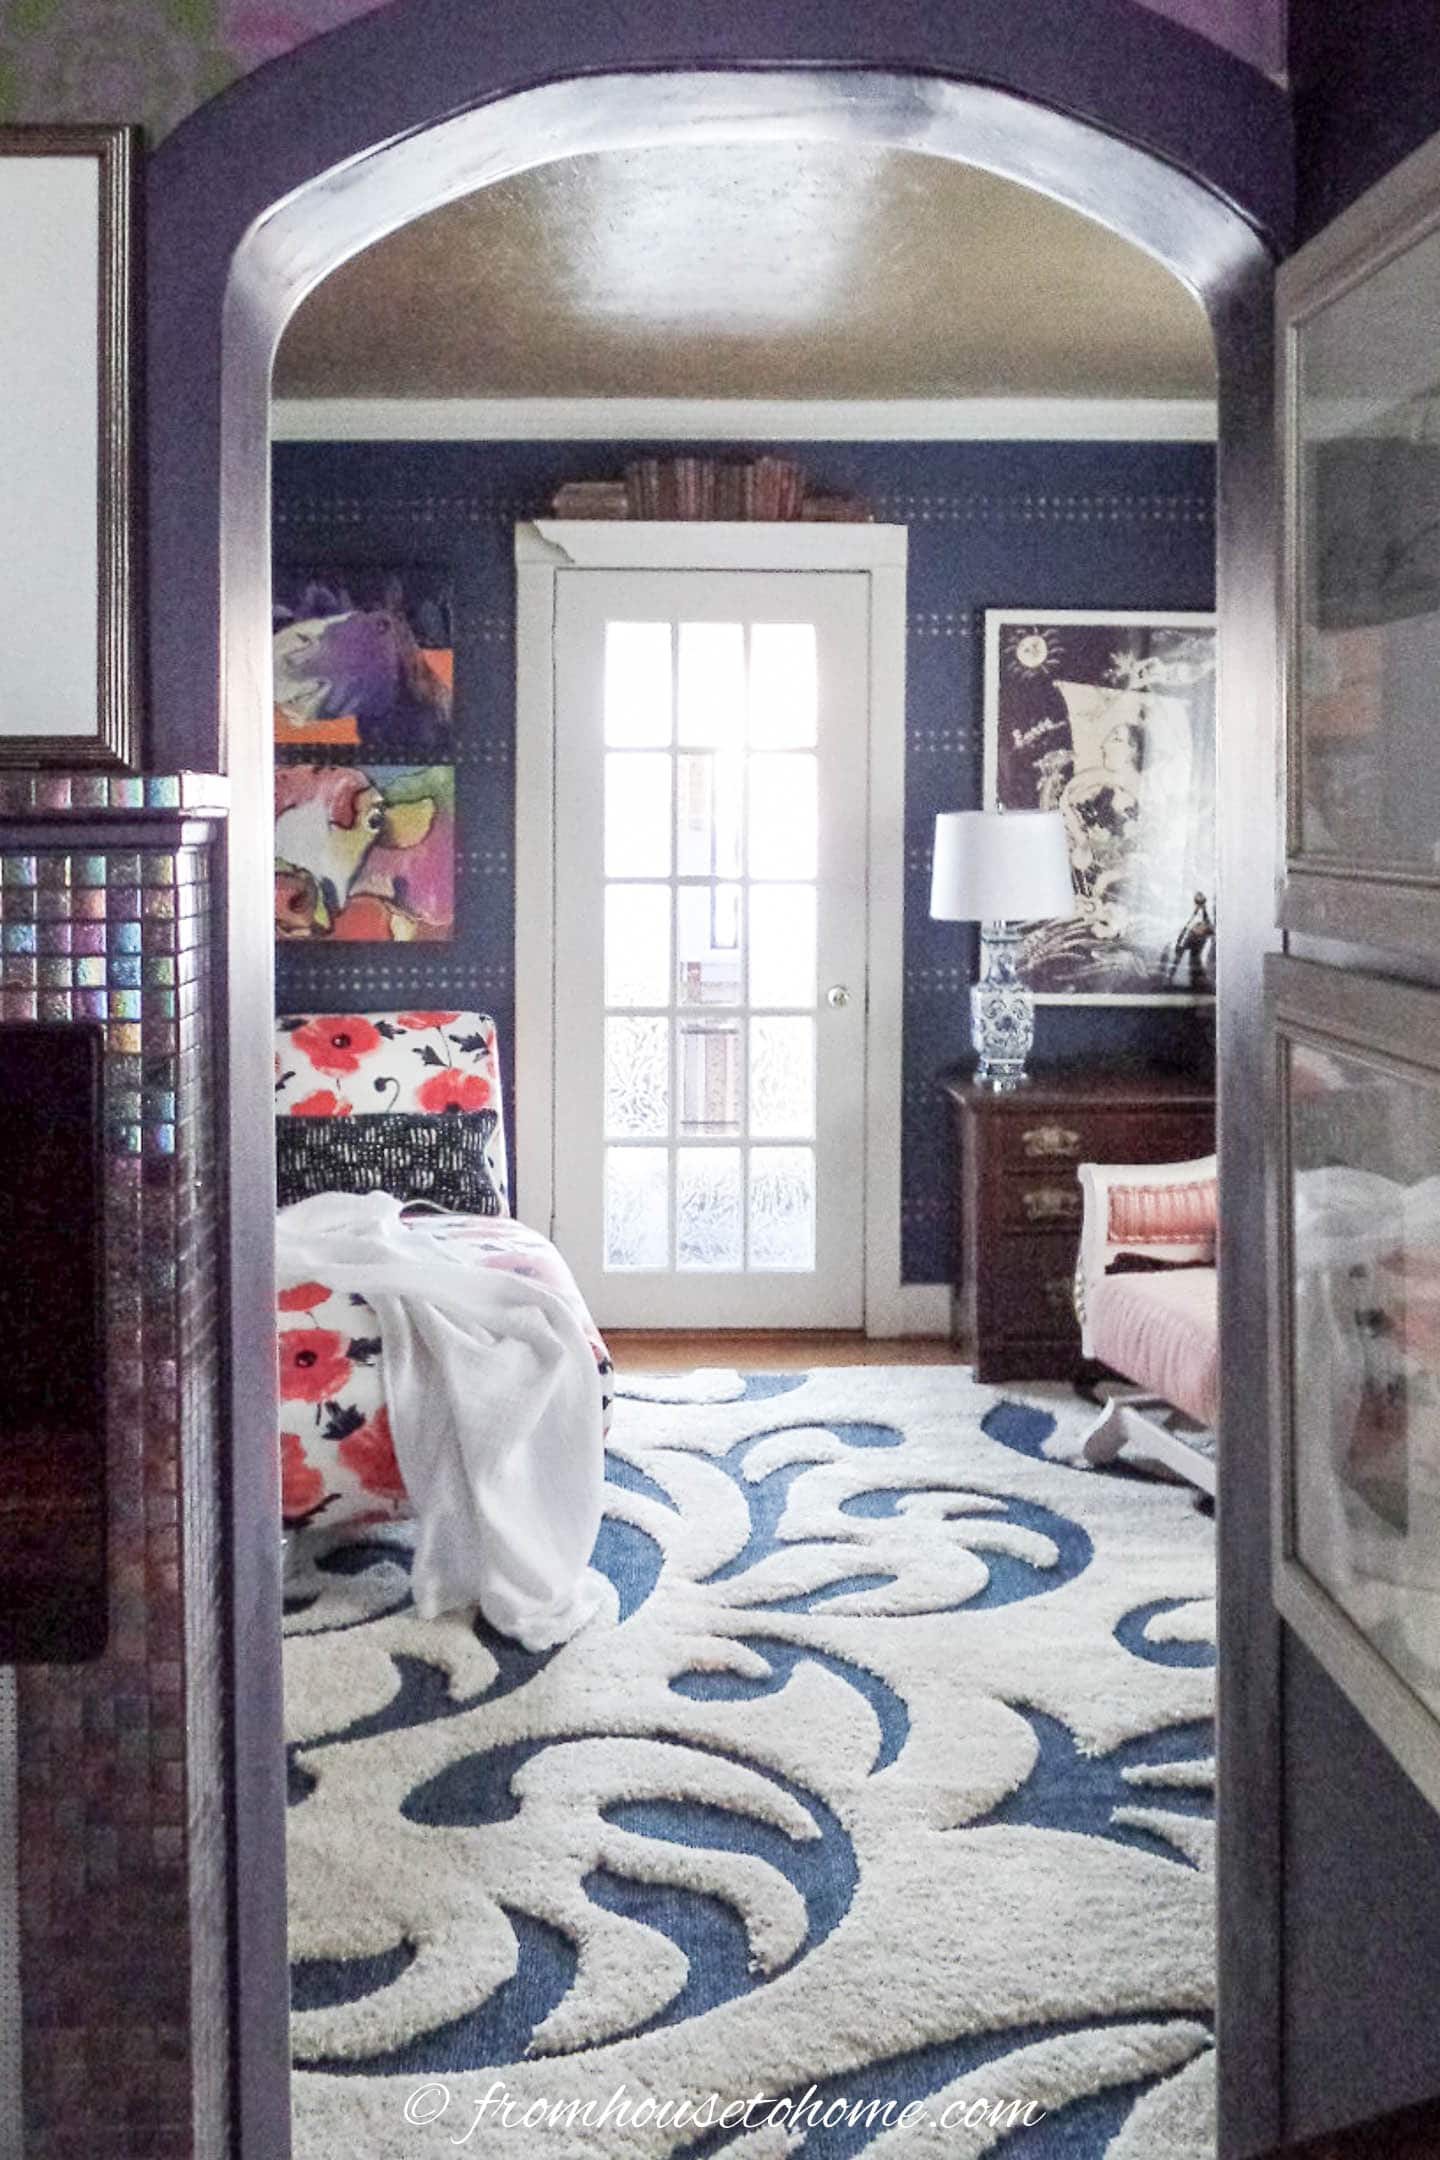 A view of the blue and white living room from the doorway